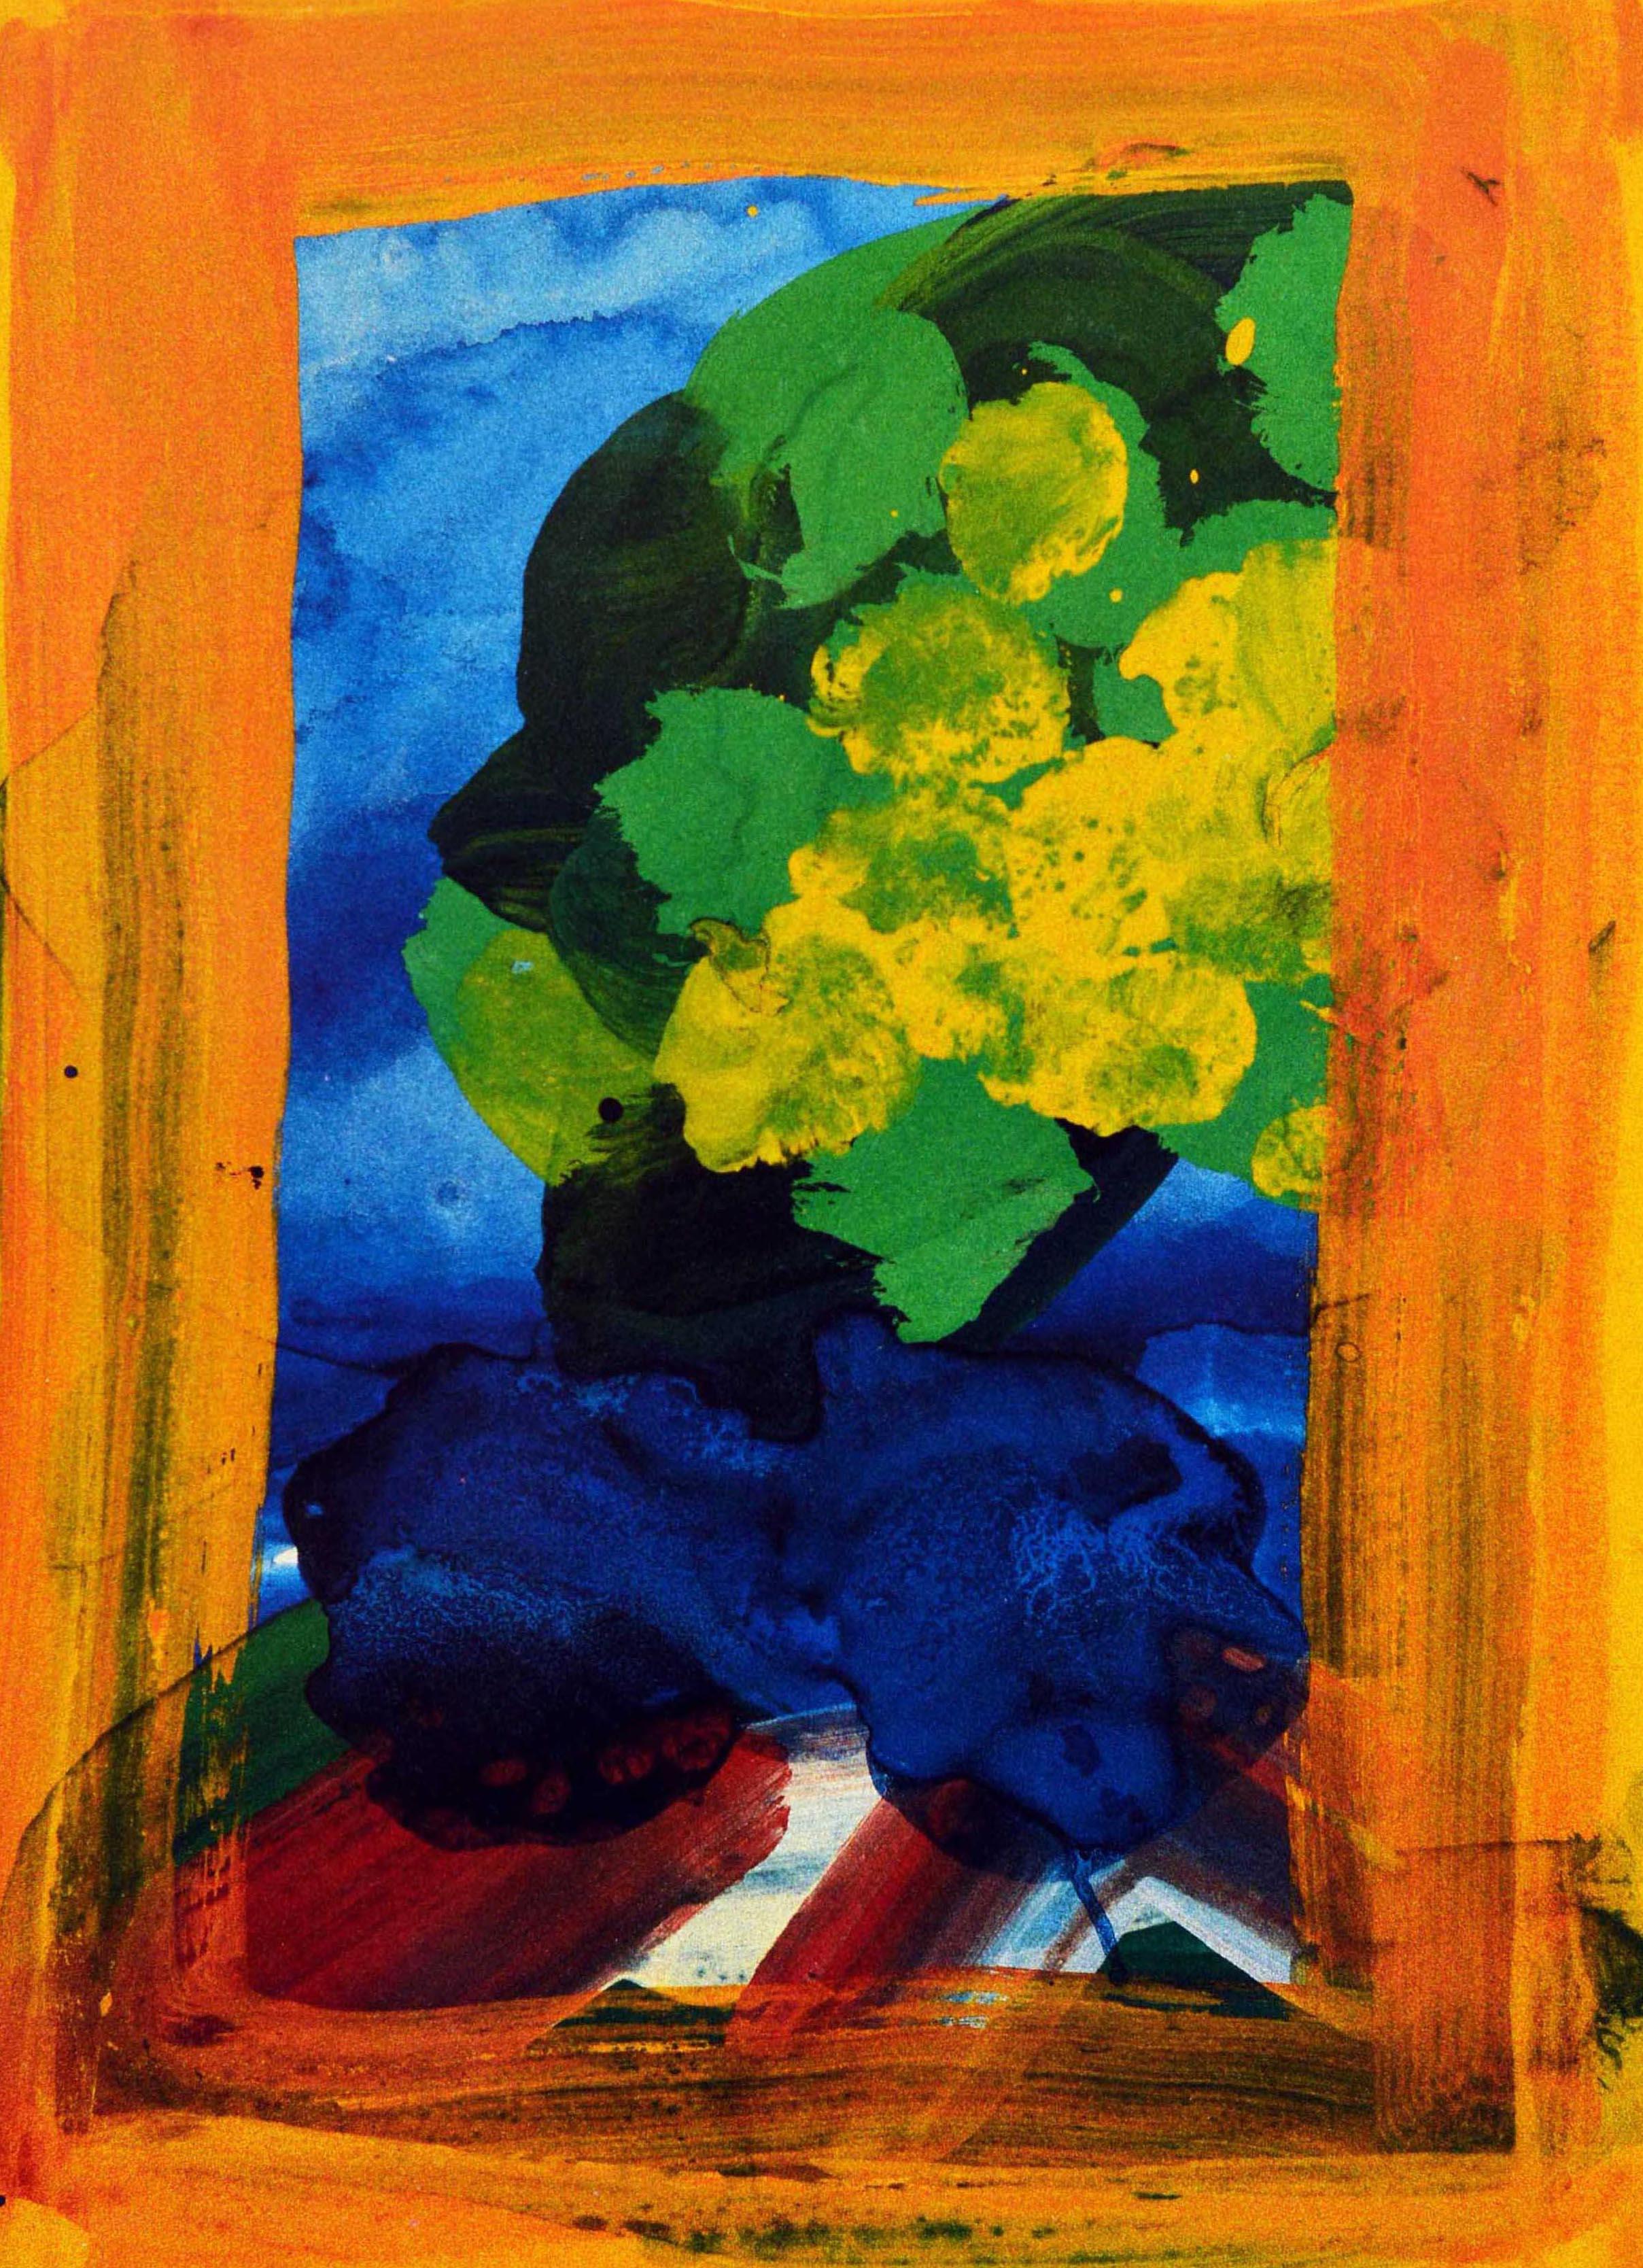 Original vintage London Underground poster - Highgate Ponds nearest stations Hampstead, Highgate. Colourful painterly image of flowers, trees and water inside a yellow orange framed border. Highgate Ponds by Howard Hodgkin a new work of art